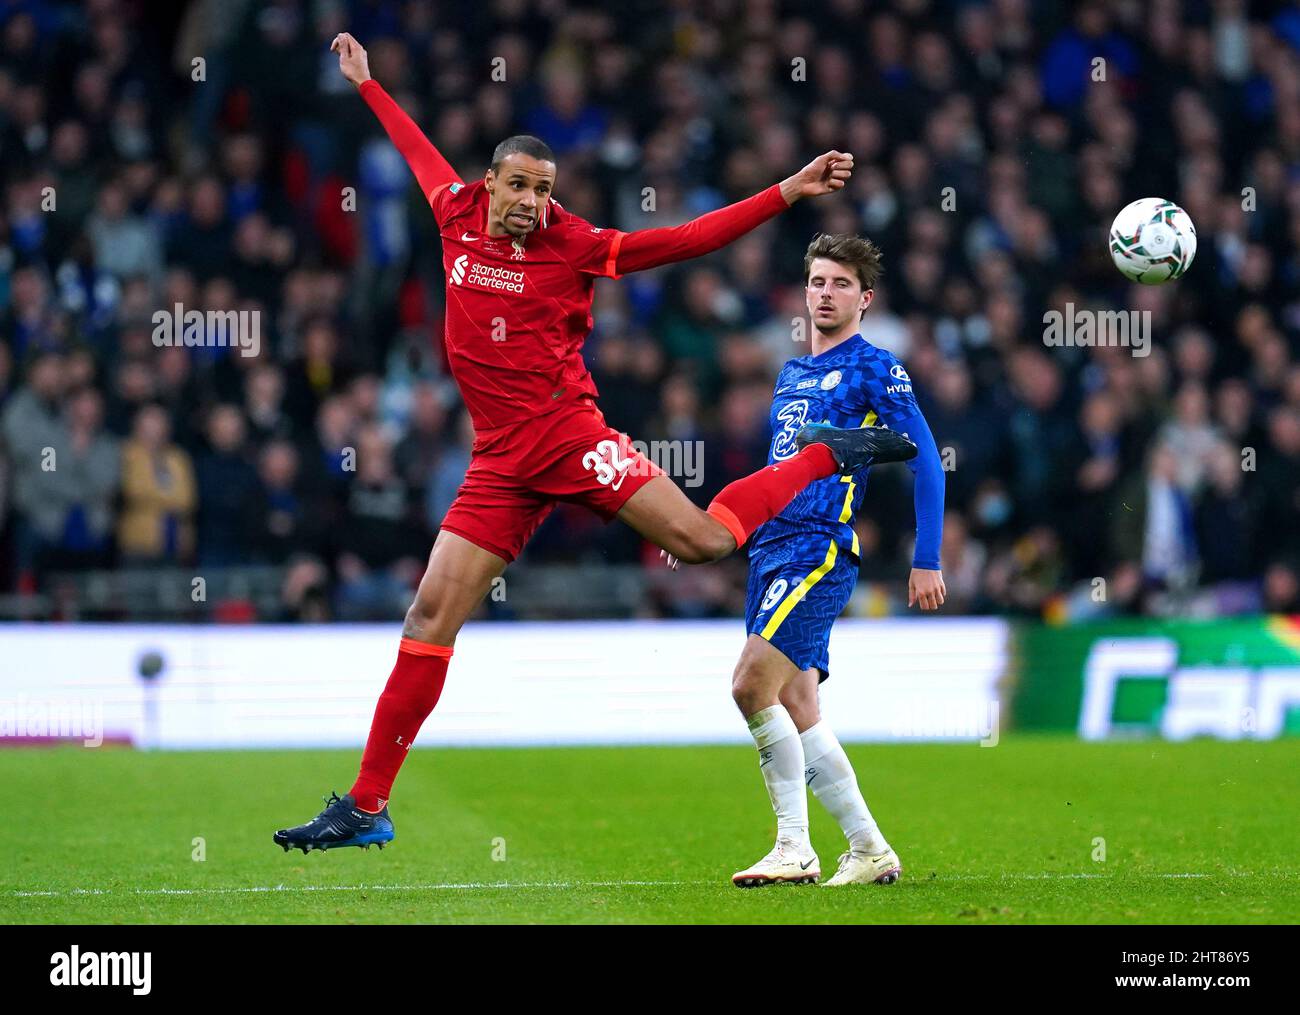 Liverpool's Joel Matip (left) and Chelsea's Mason Mount battle for the ball during the Carabao Cup final at Wembley Stadium, London. Picture date: Sunday 27th February, 2022. Stock Photo